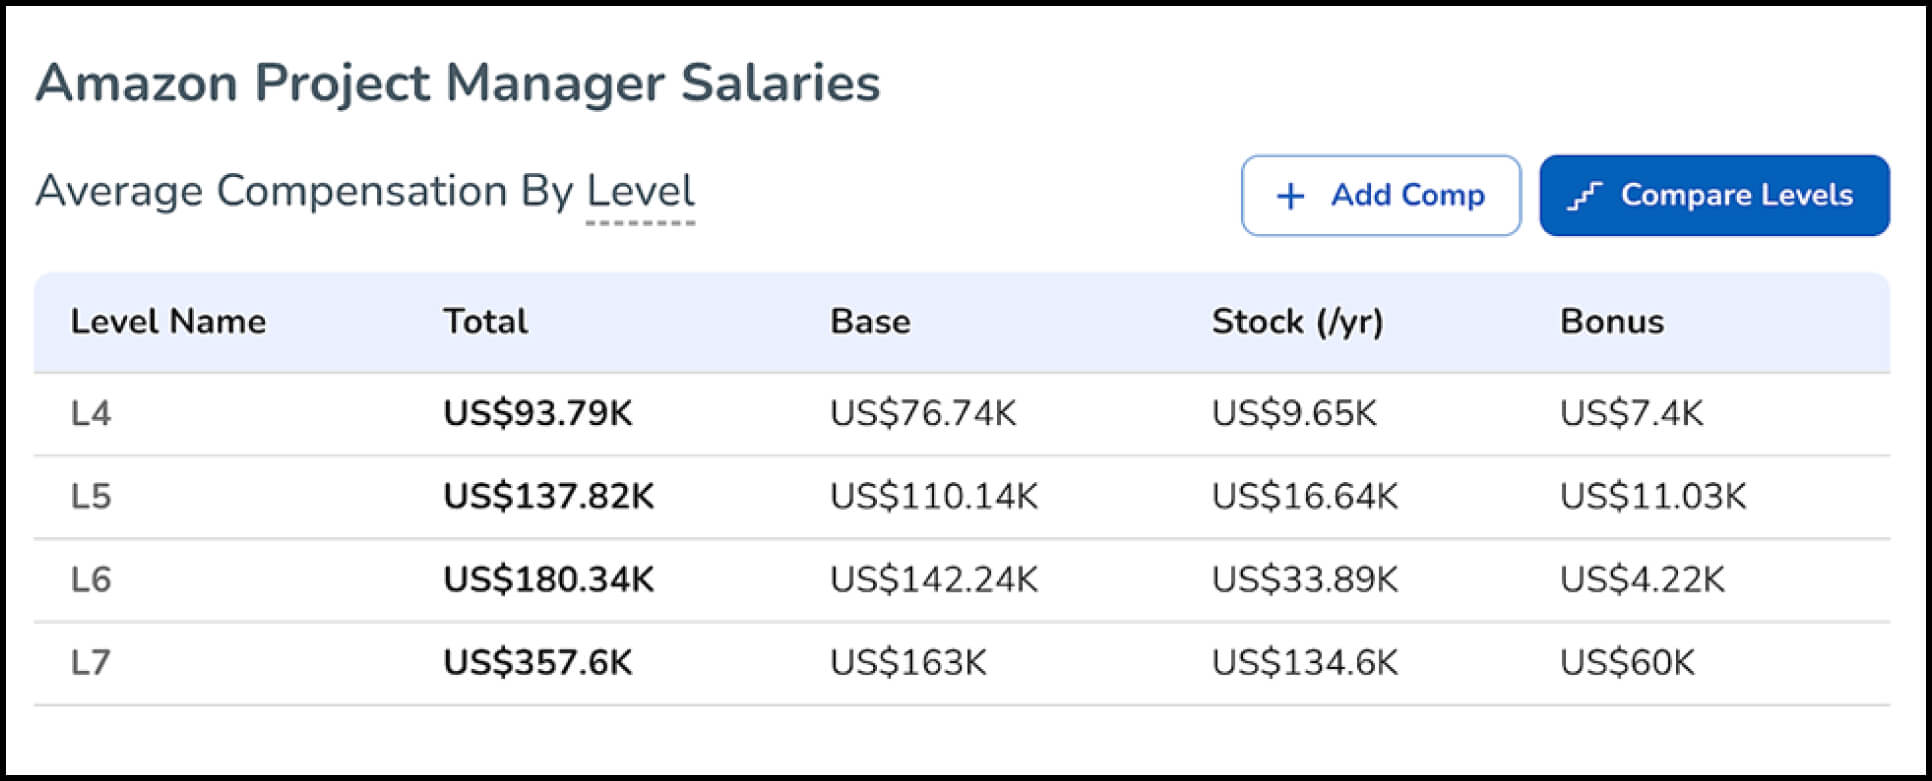 levels dot fyi website showing amazon project manager salaries at different levels